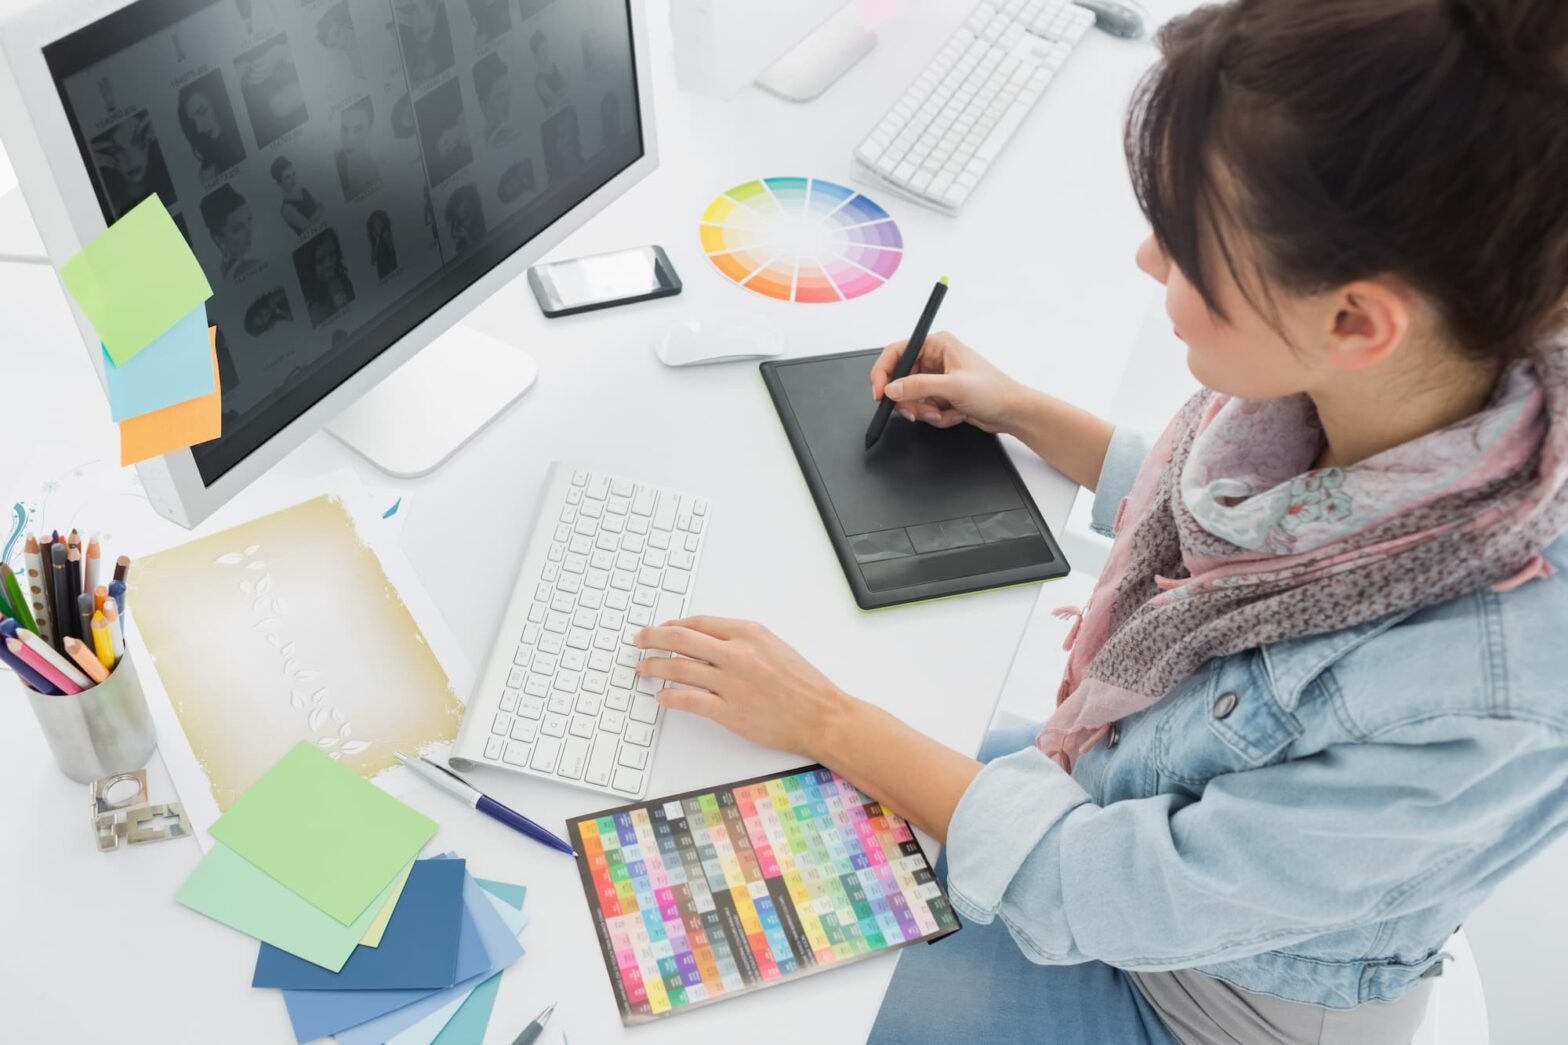 Featured image for post: What Can You Do With a Graphic Design Degree?